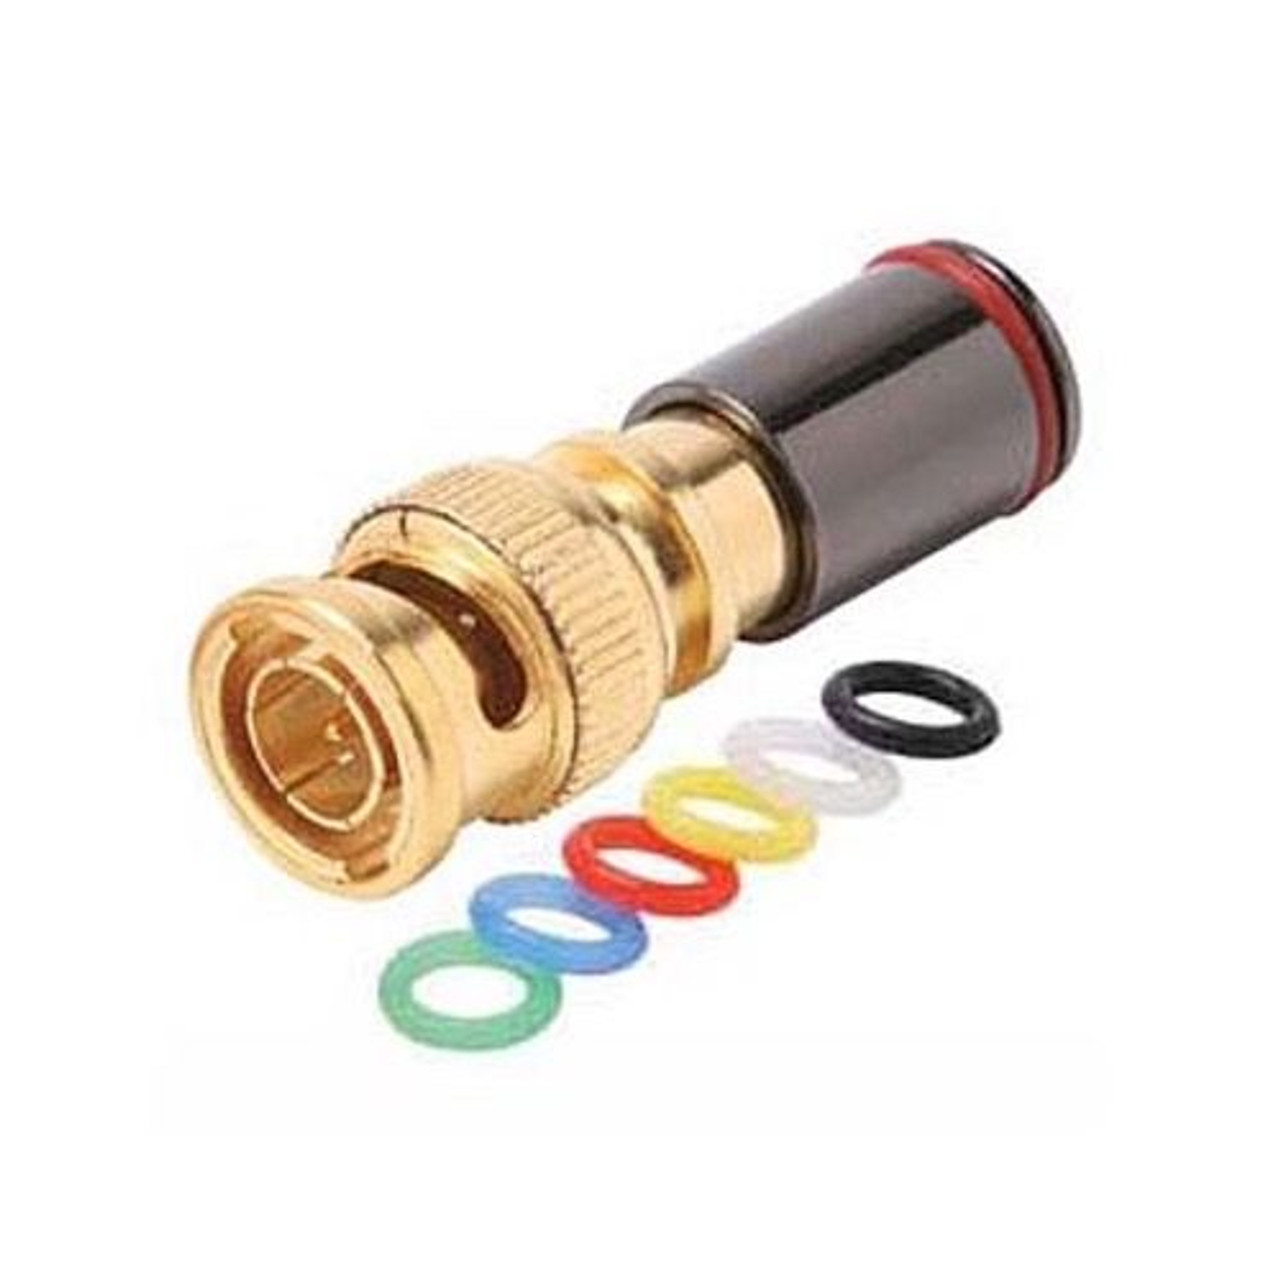 Steren 200-084 RG-59 BNC Compression Connector Gold Plated with 6 Color Bands Permaseal II Coaxial Cable Snap-On Line Plug Adapter, RF Digital Audio Video RG59 Component Connection, Part # 200084